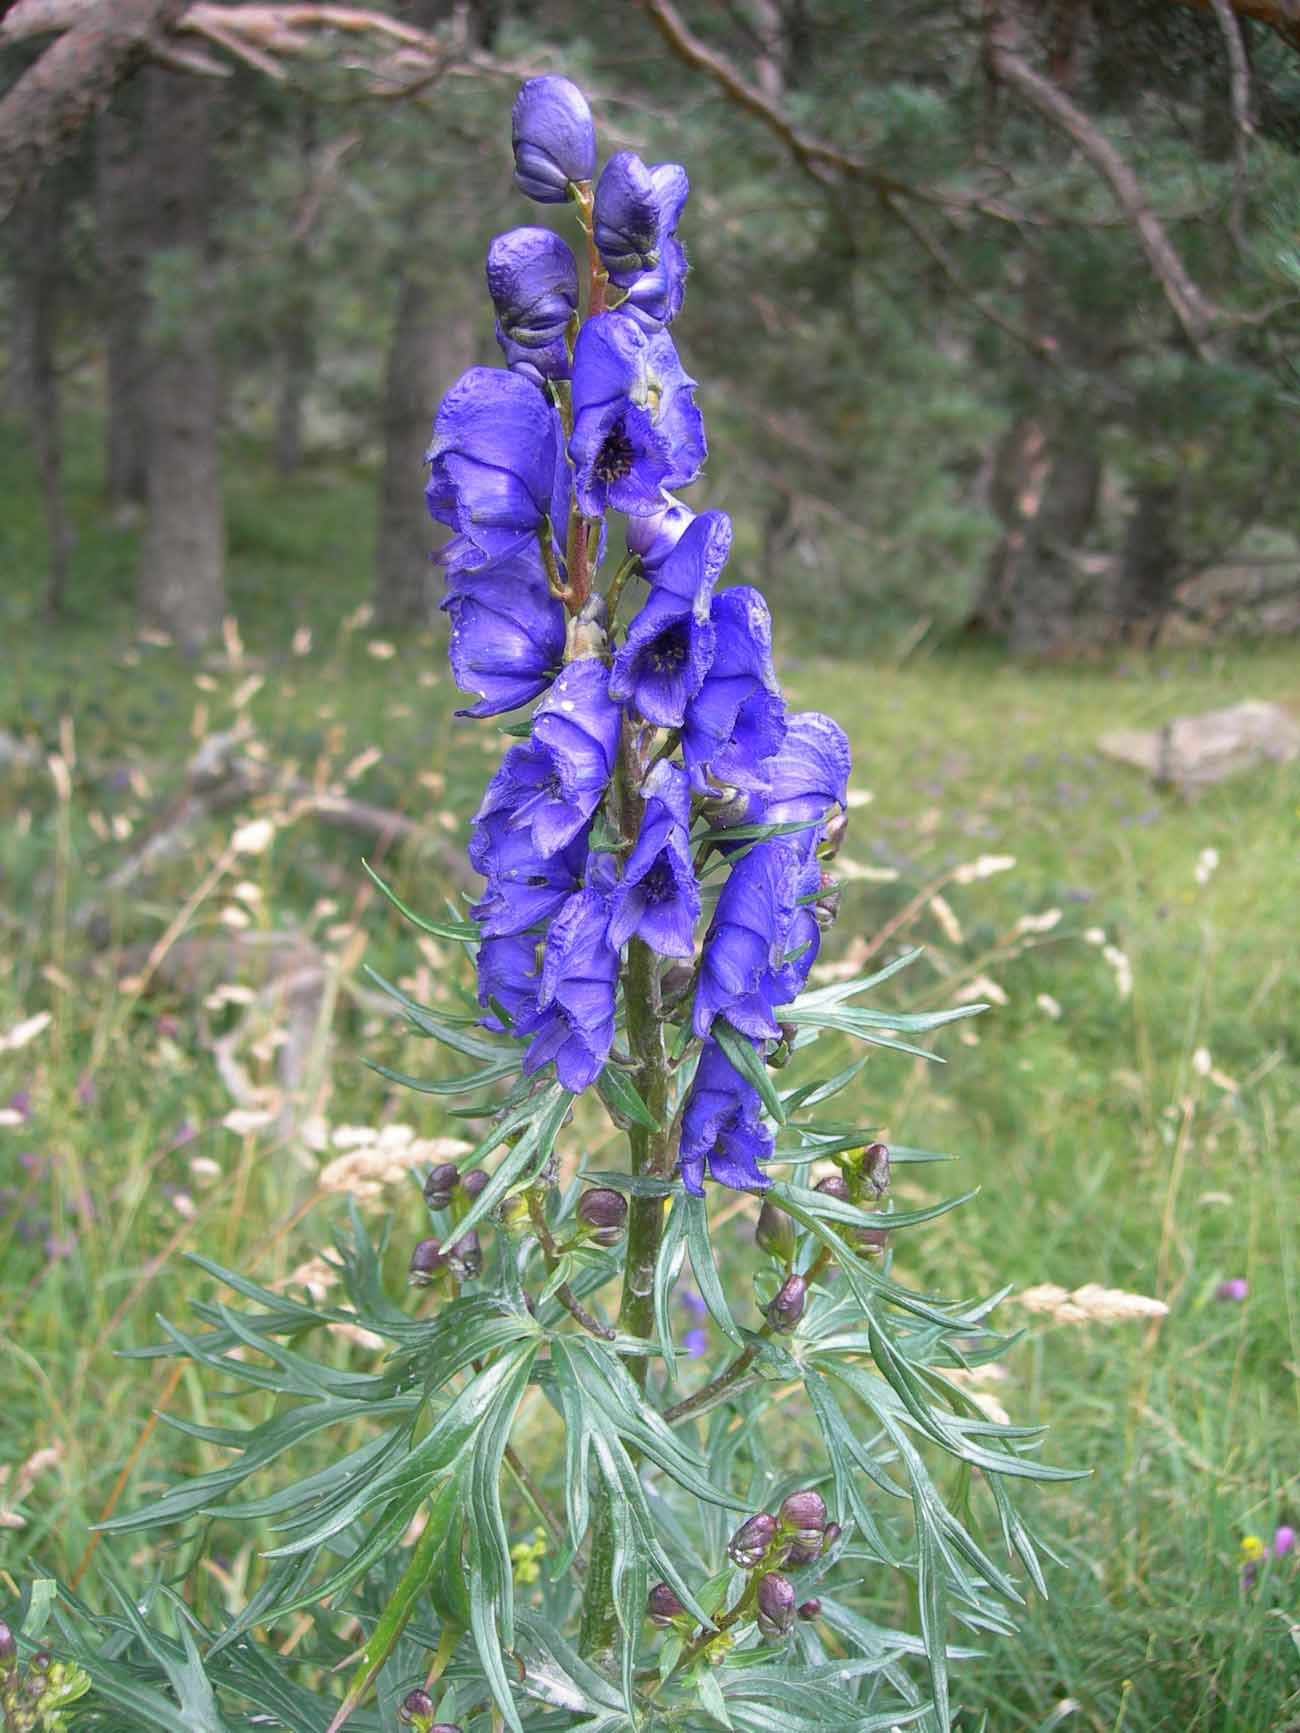 Aconite Facts And Health Benefits